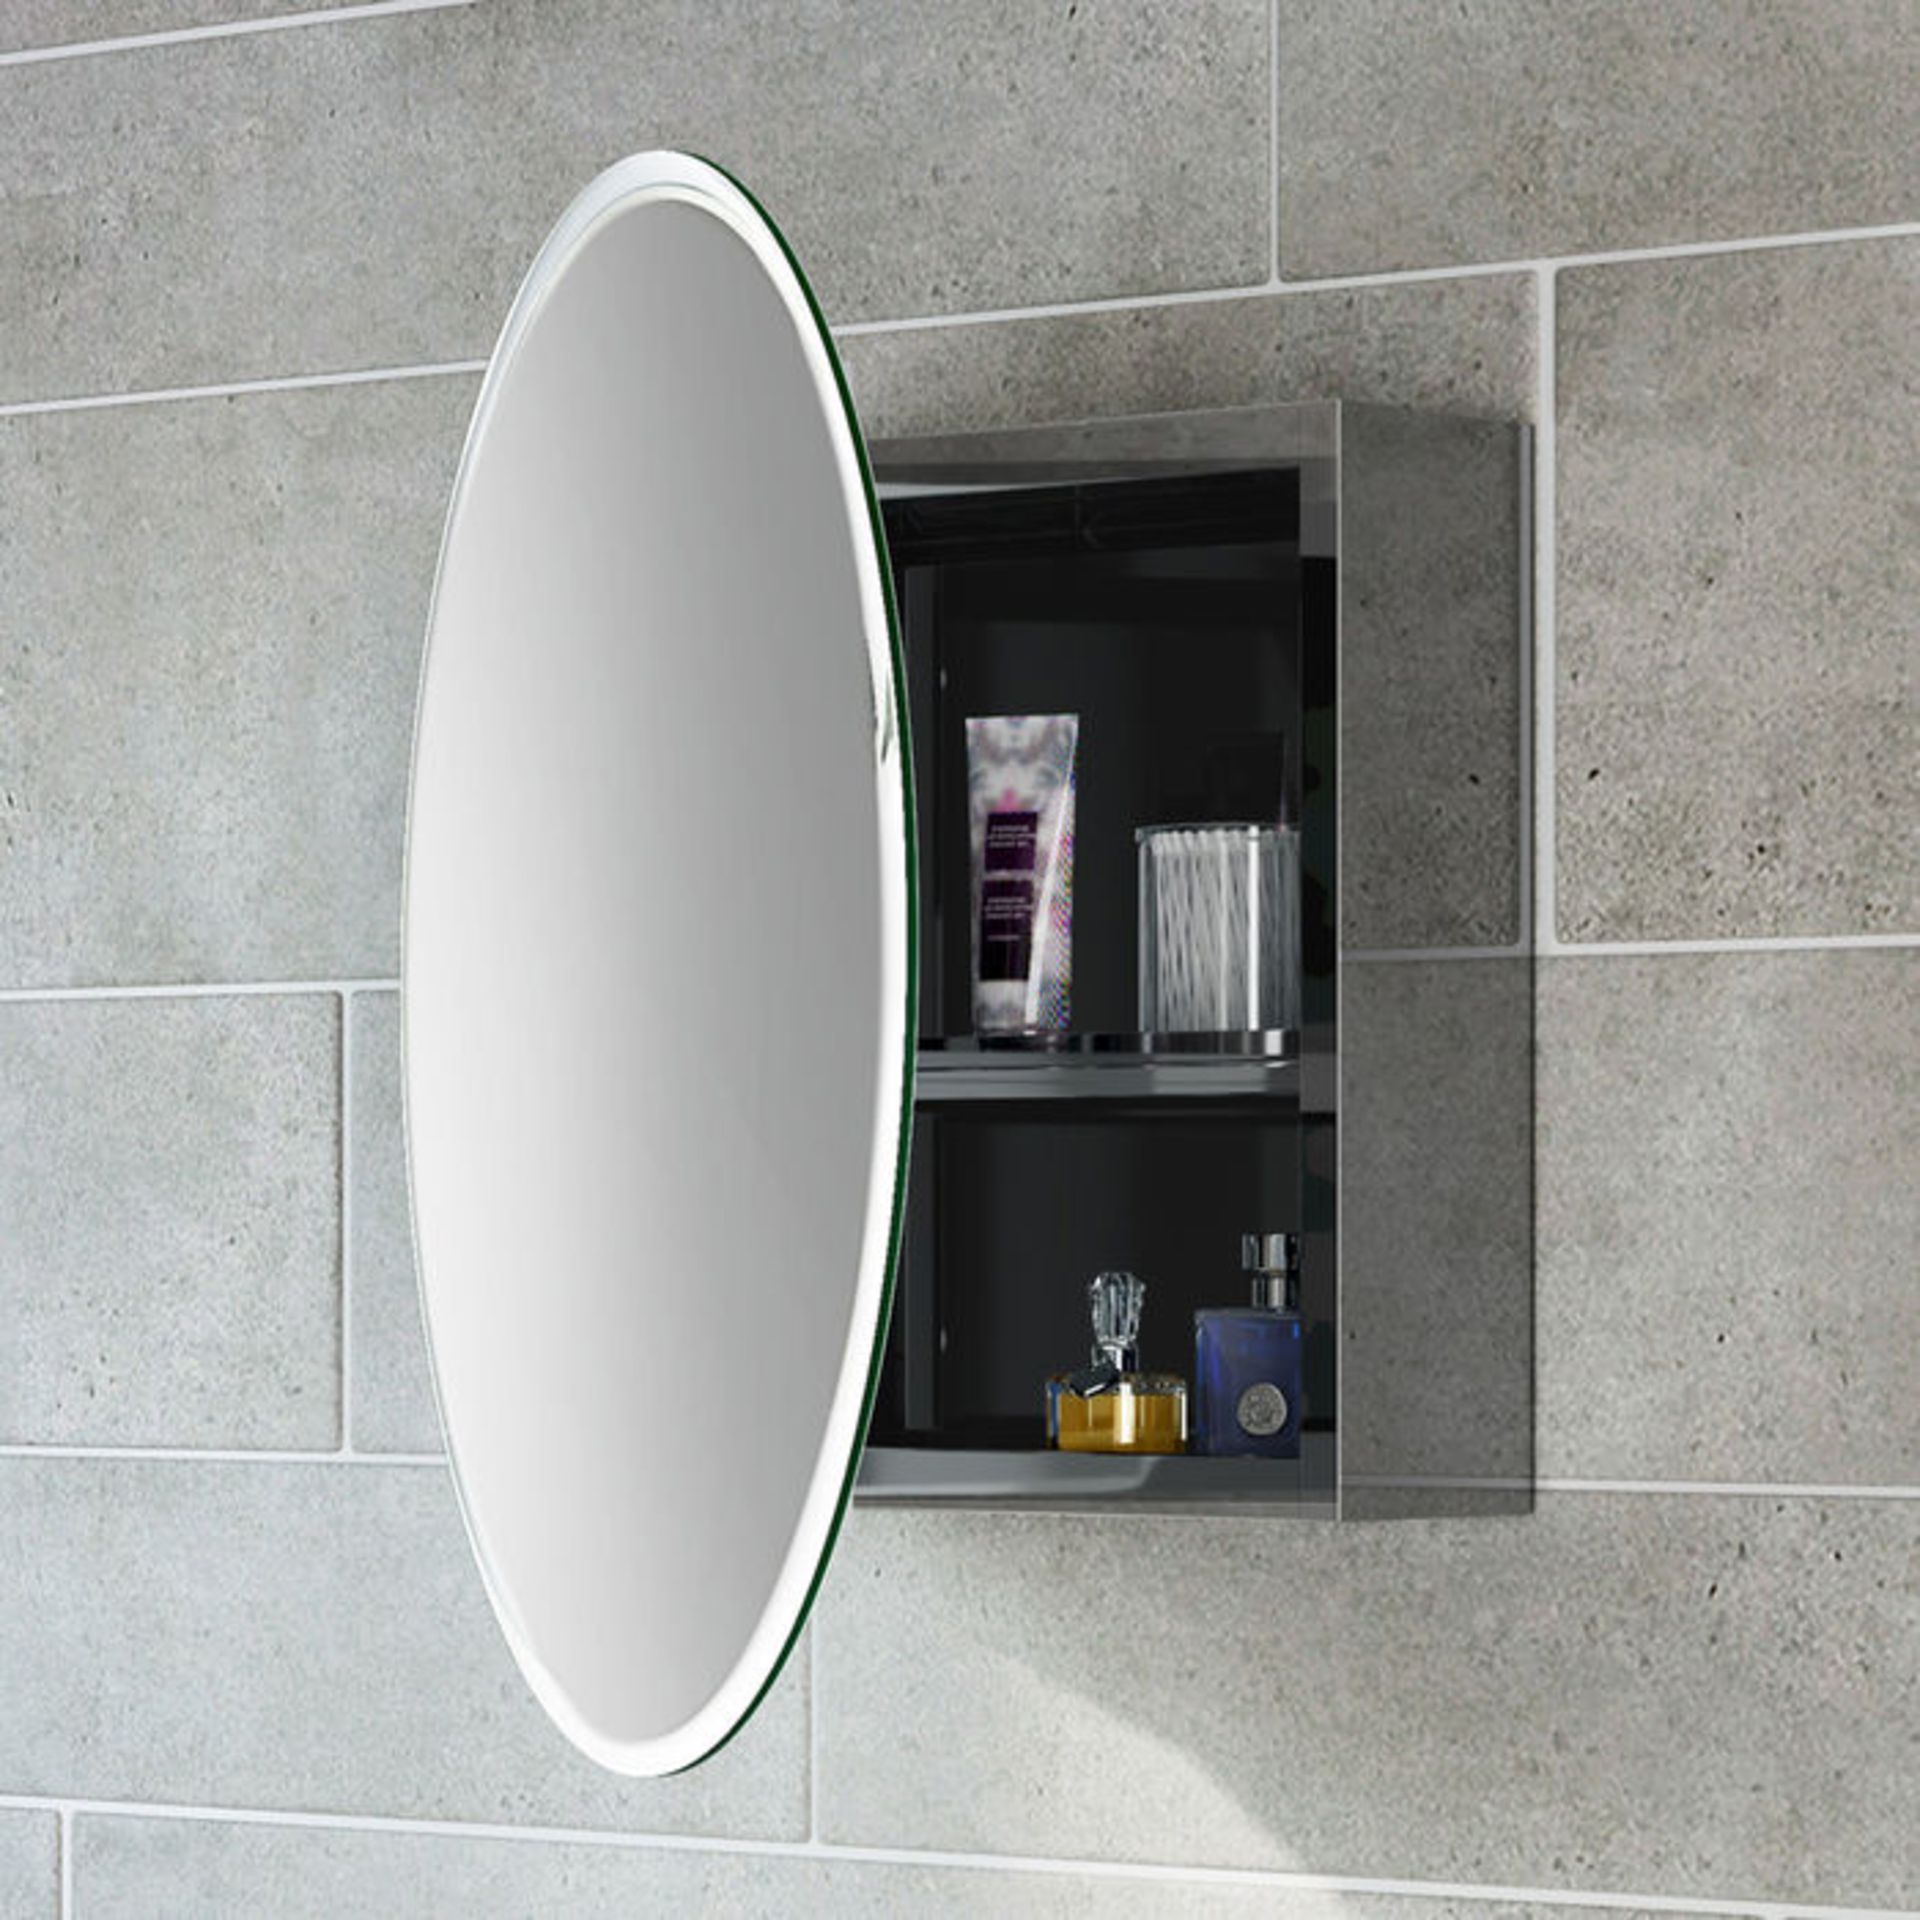 (T60)500 x 500 Round Liberty Stainless Steel Mirror Cabinet. Made from high-grade stainless